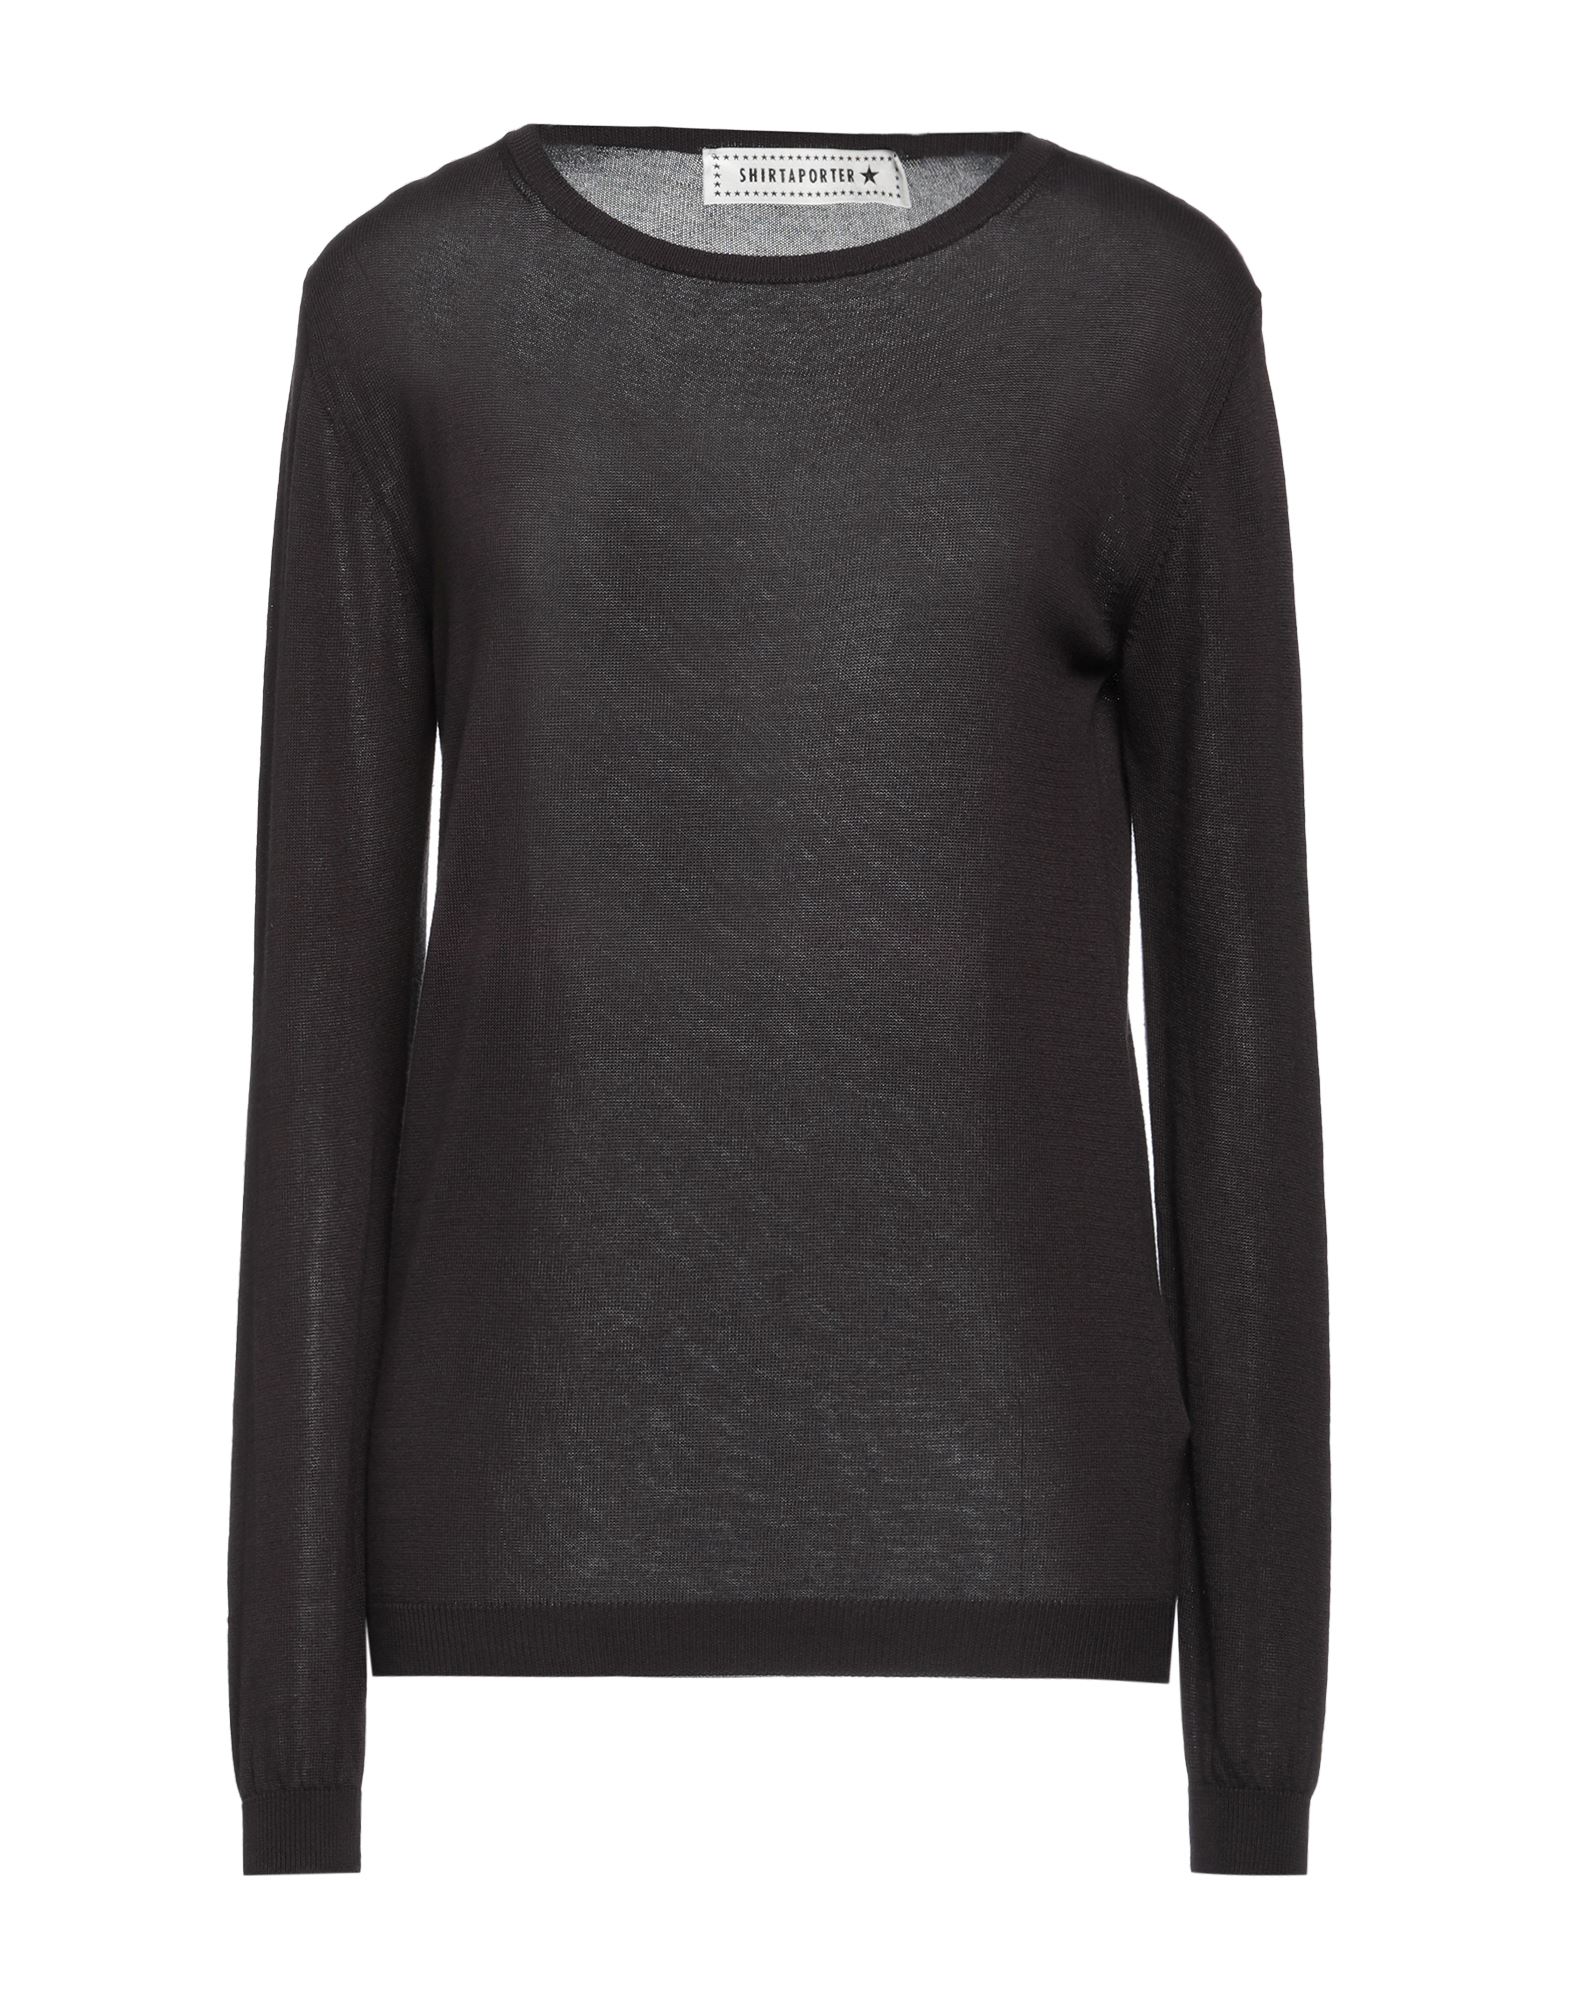 Shirtaporter Sweaters In Brown